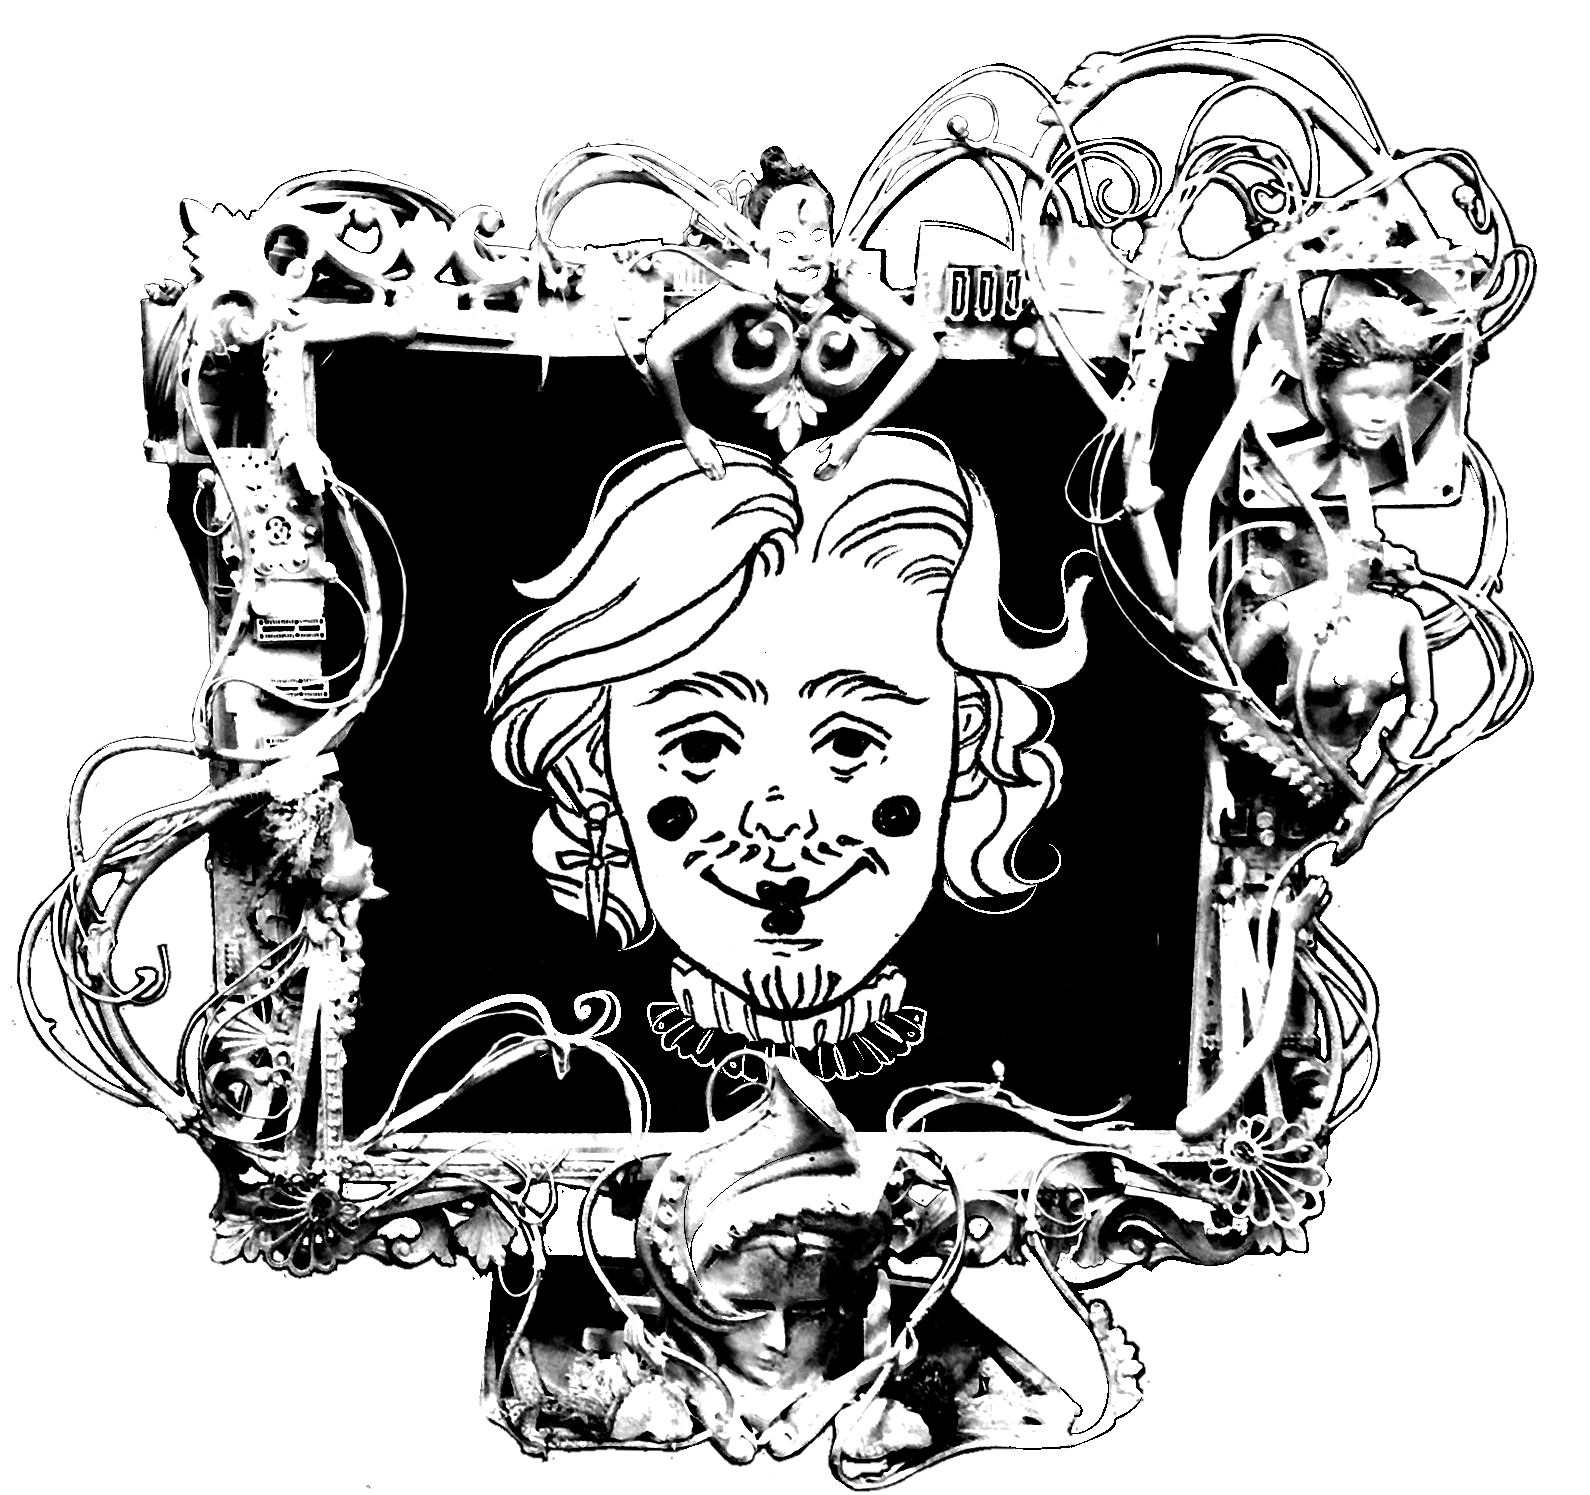 A greyscale picture of a computer screen ornamented with wires and doll limbs like an ornate picture frame. On the screen is a drawing of the face of Dionysos Slain, smiling